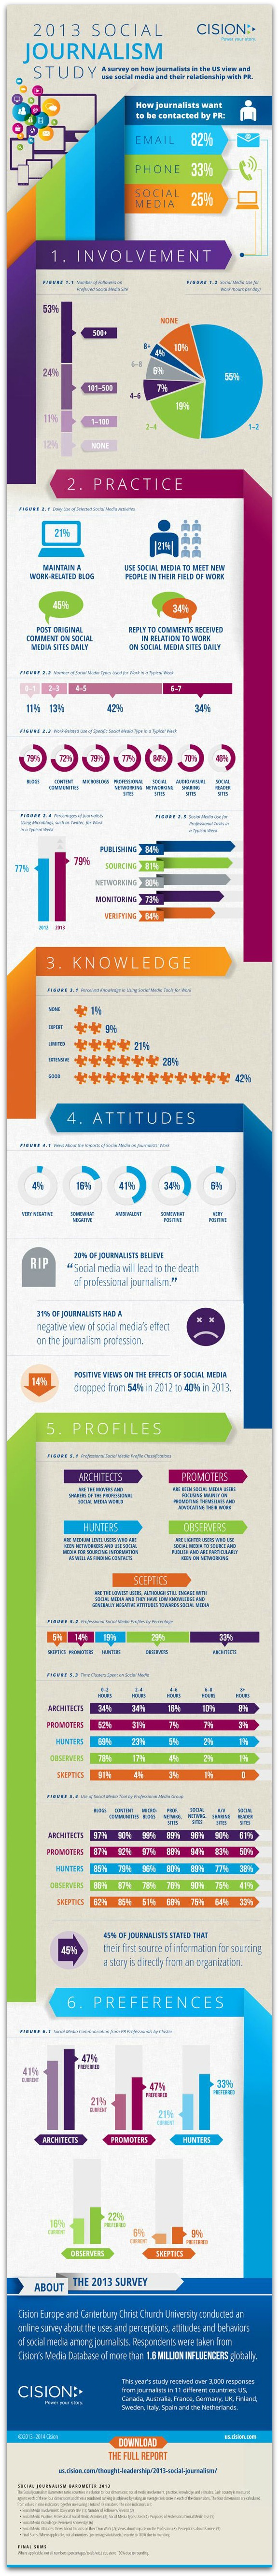 Infographie 81 - How_Reporters_Journalists_Use_Social_Media_Infographic